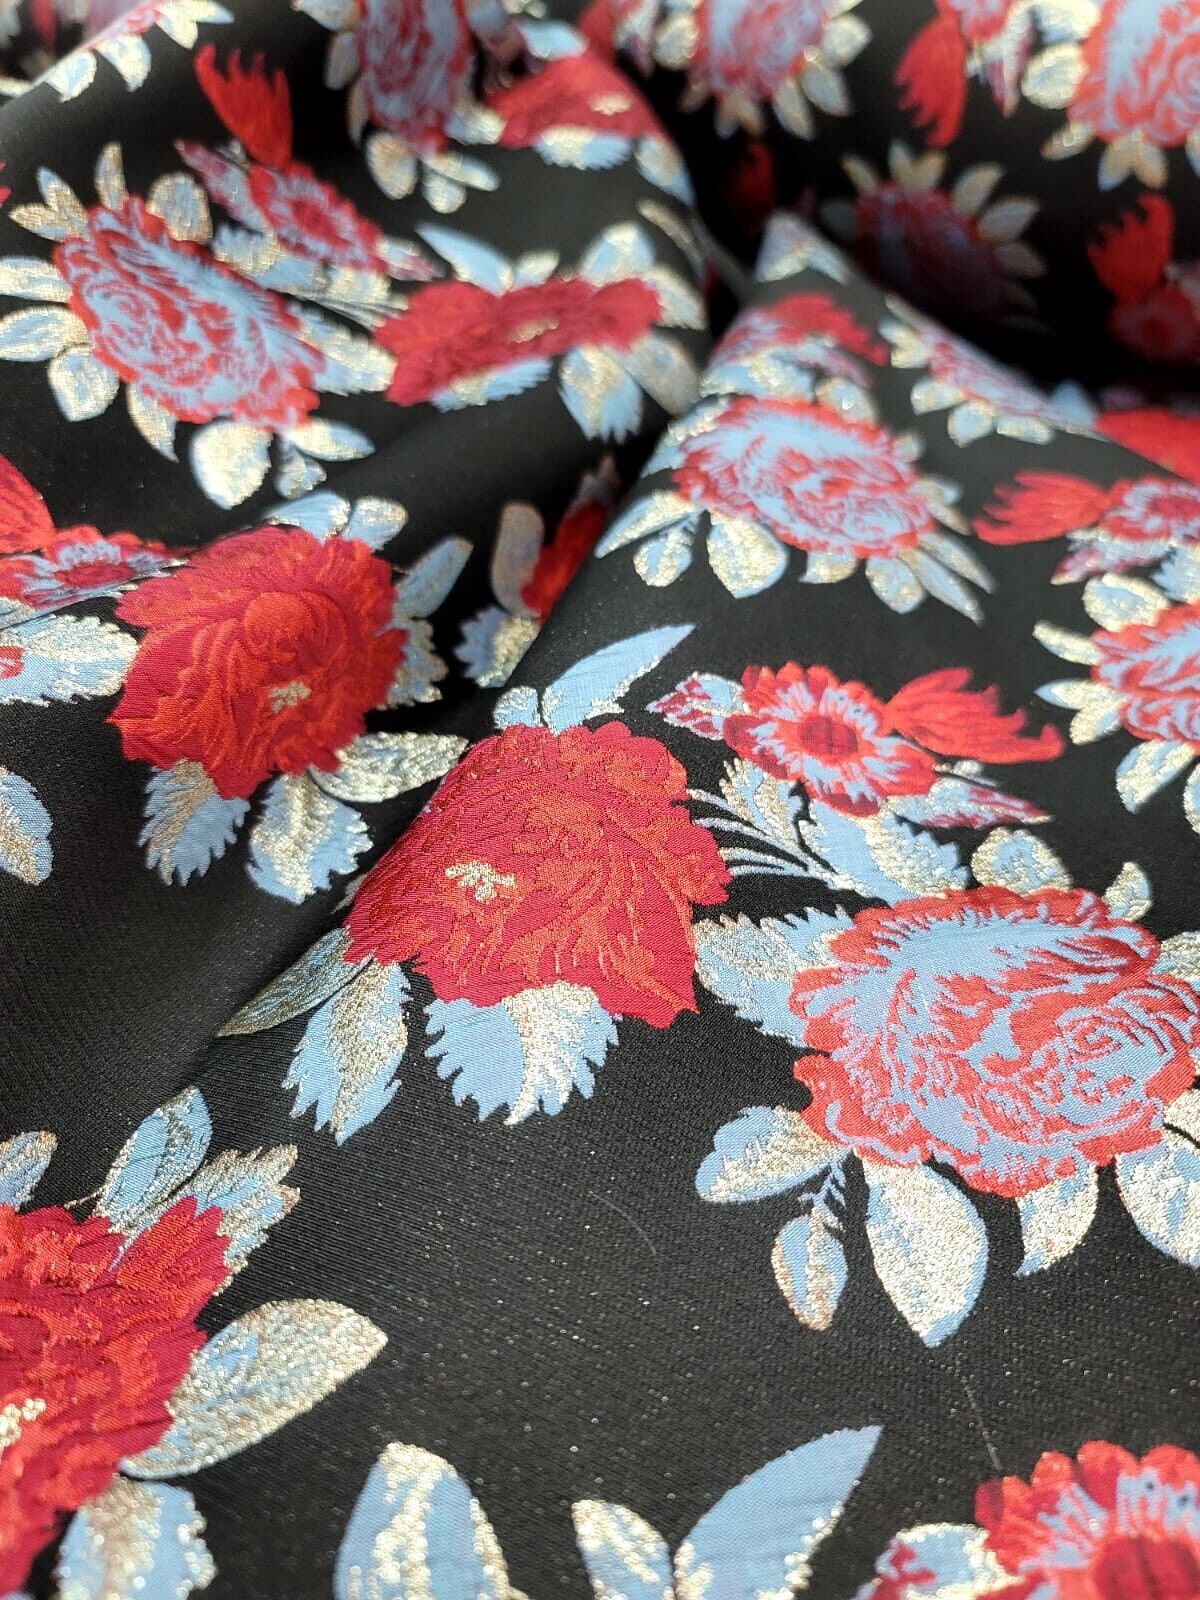 Baby Blue Red Floral Black Brocade Fabric - Sold By The Yard - For Dress Prom Bridal (60” Width)